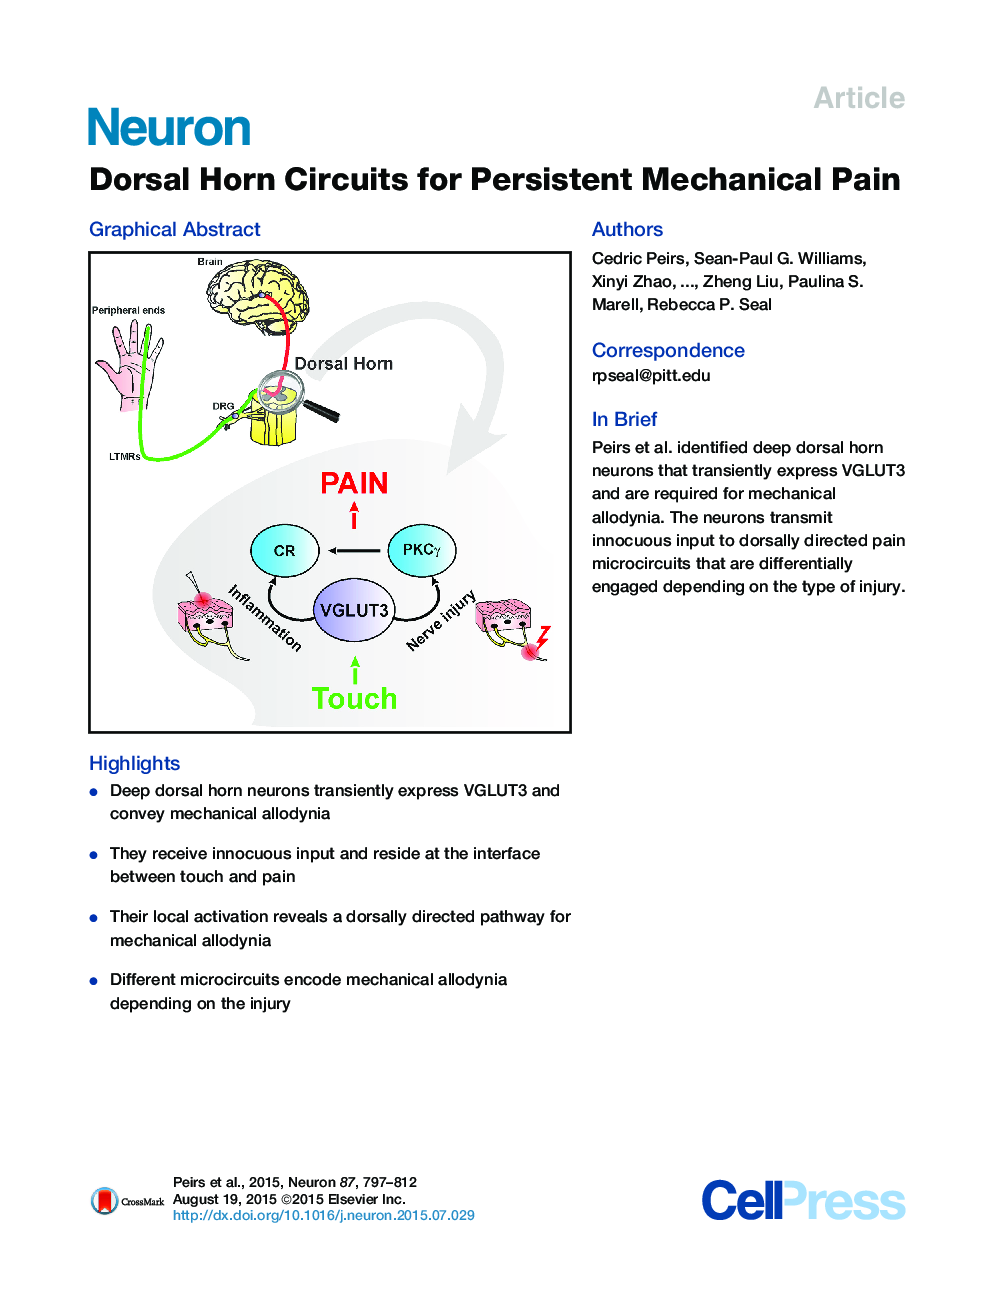 Dorsal Horn Circuits for Persistent Mechanical Pain